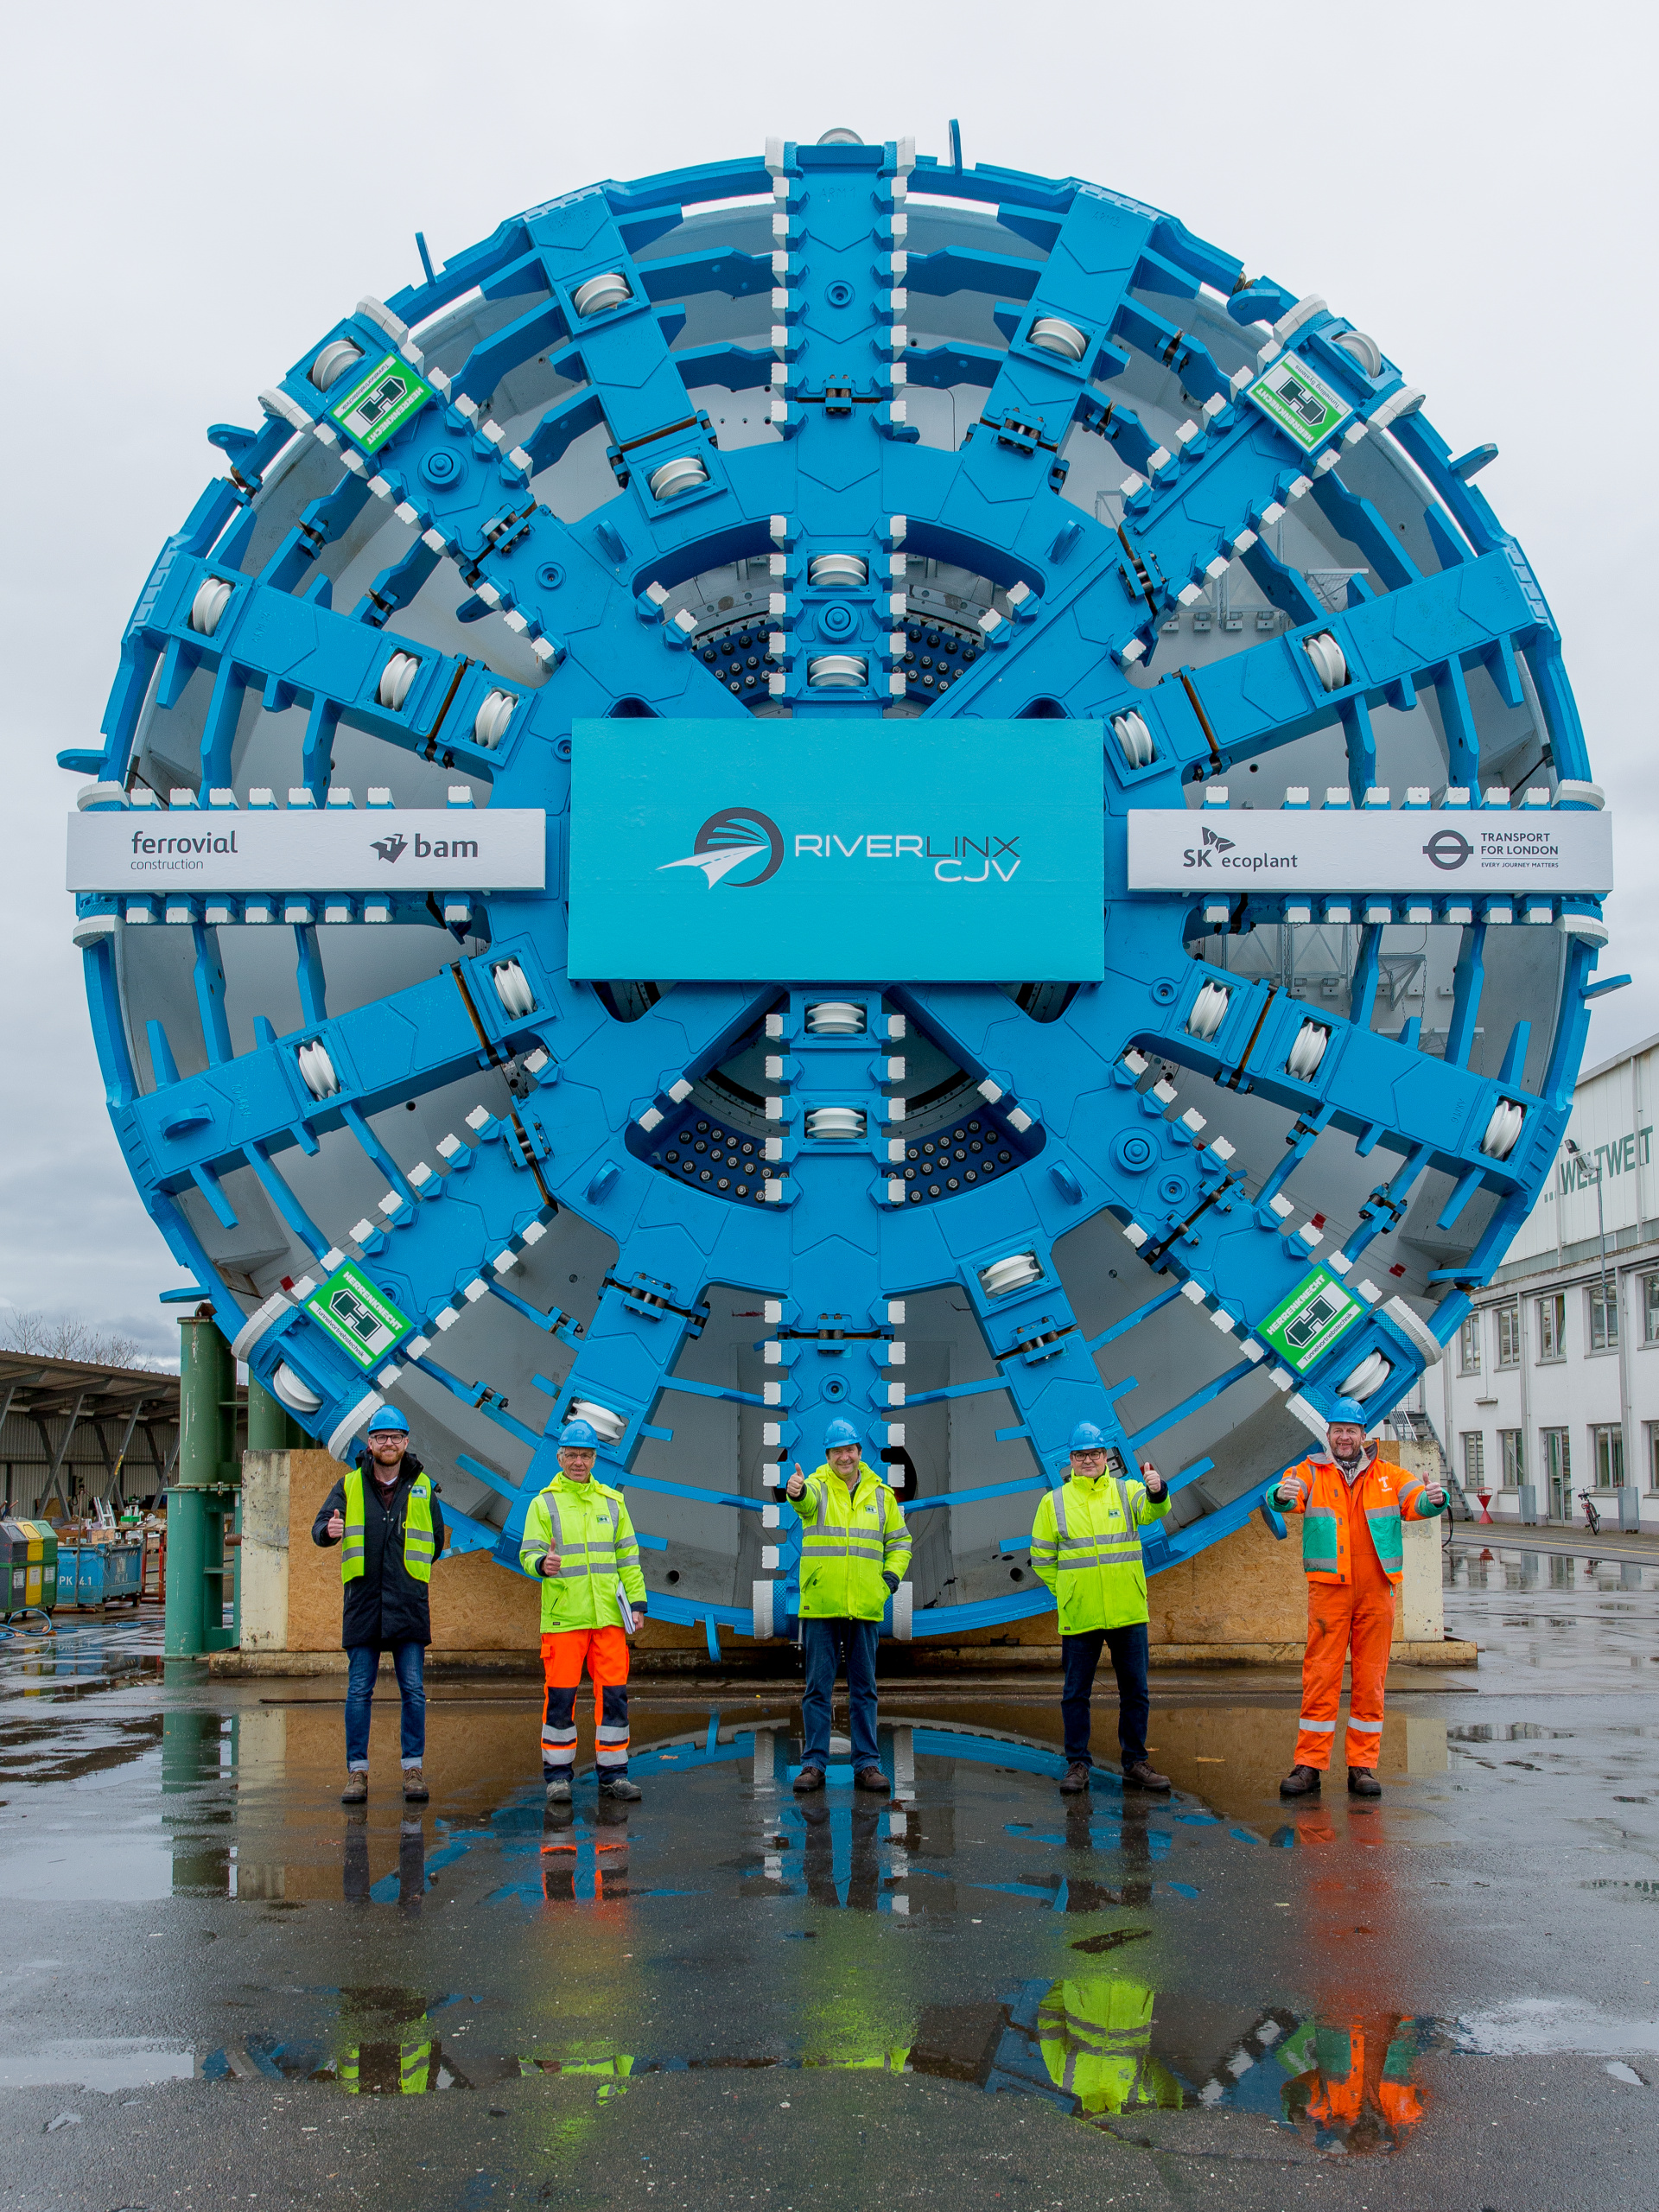 Record-breaking TBM on way to Silvertown Tunnel